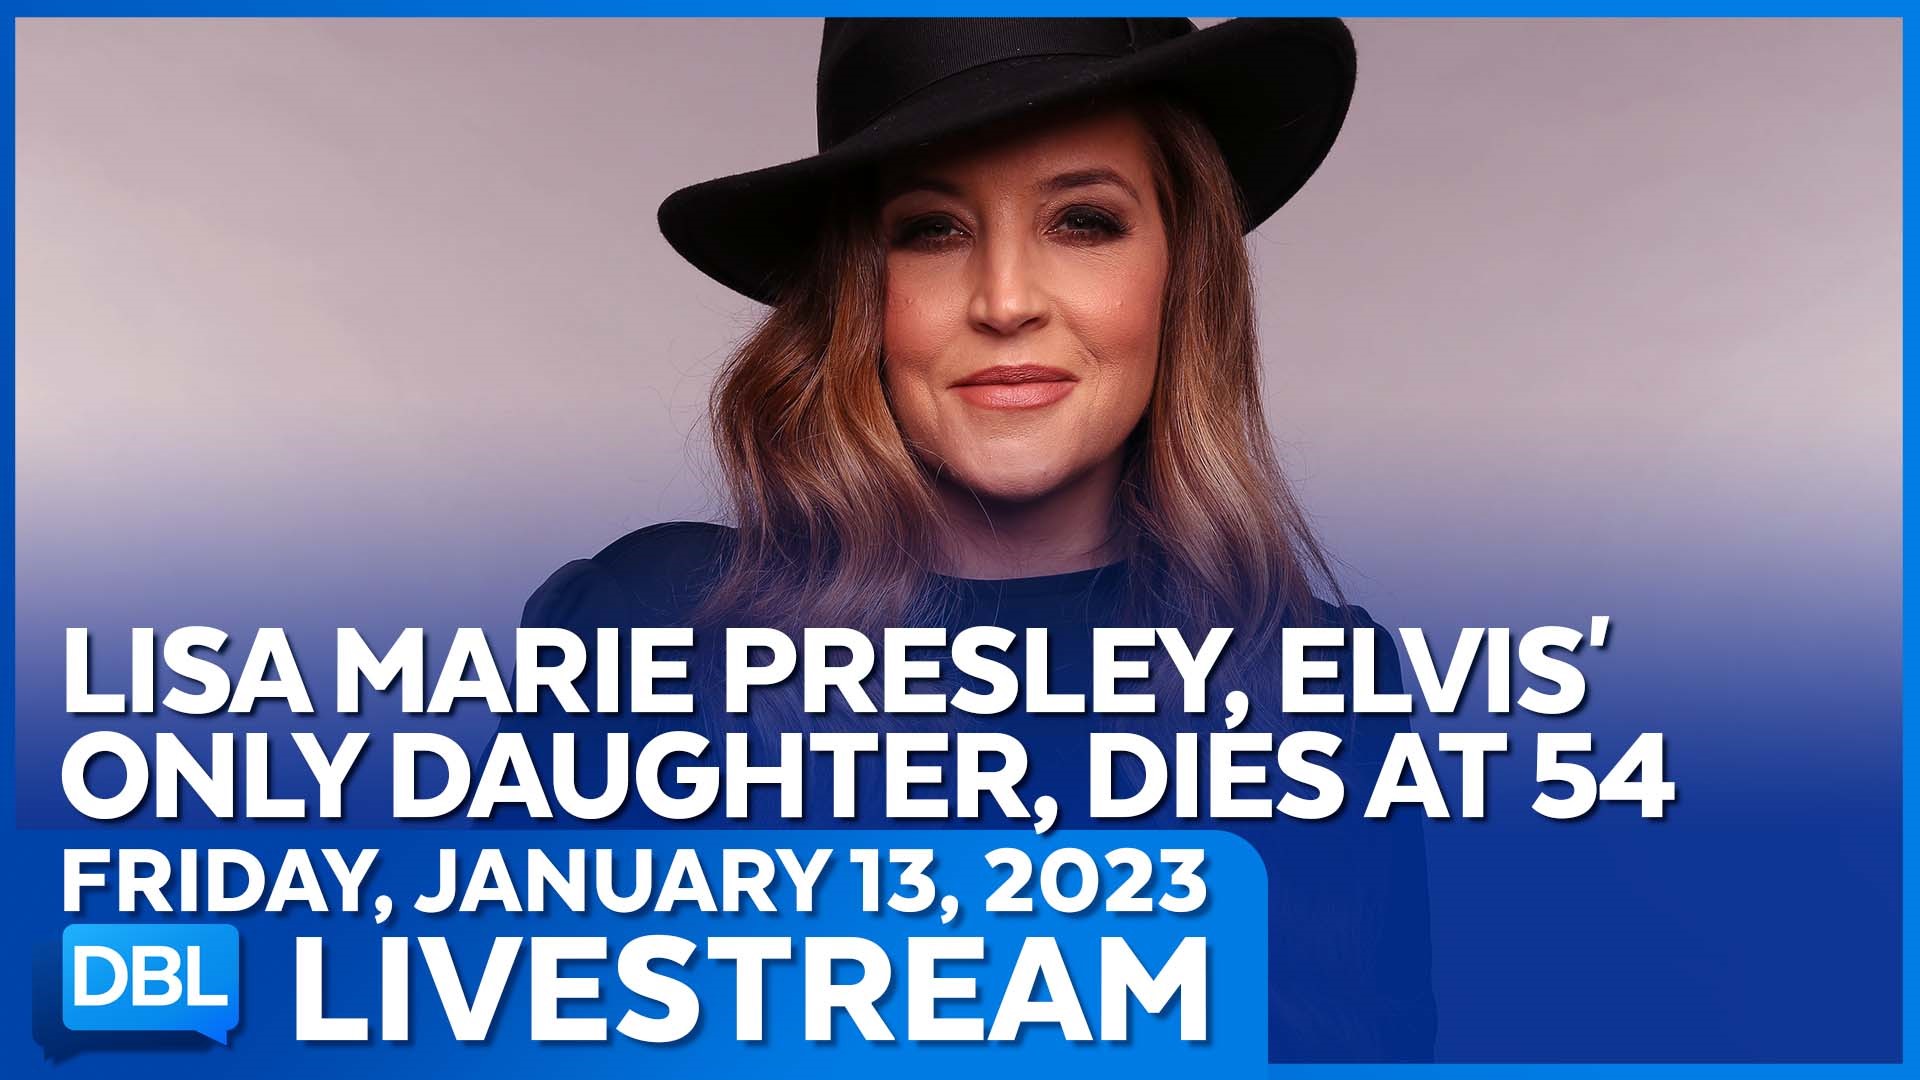 Lisa Marie Presley passes away: Dr. Kohli discusses medical questions surrounding her death; The best ways to lose weight; An ex-CDC official debunks medical myths.